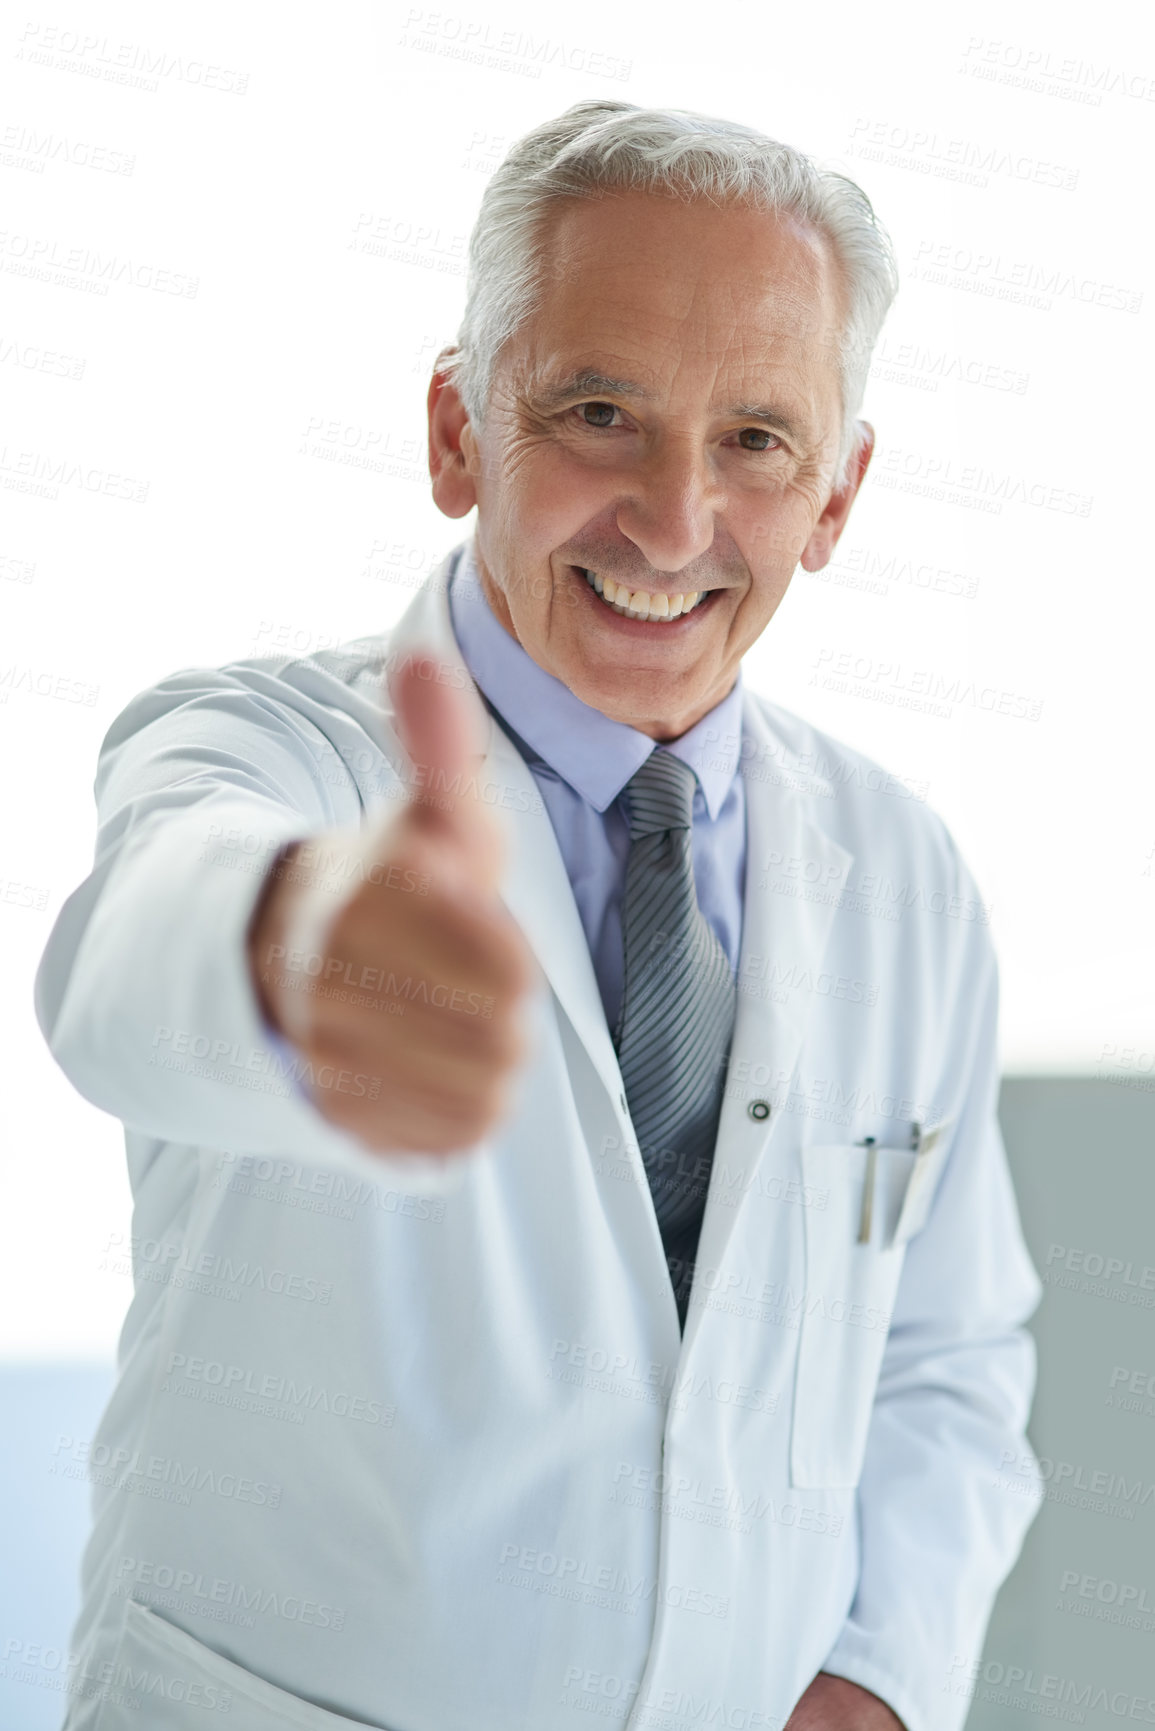 Buy stock photo Portrait of a mature doctor showing thumbs up in a hospital